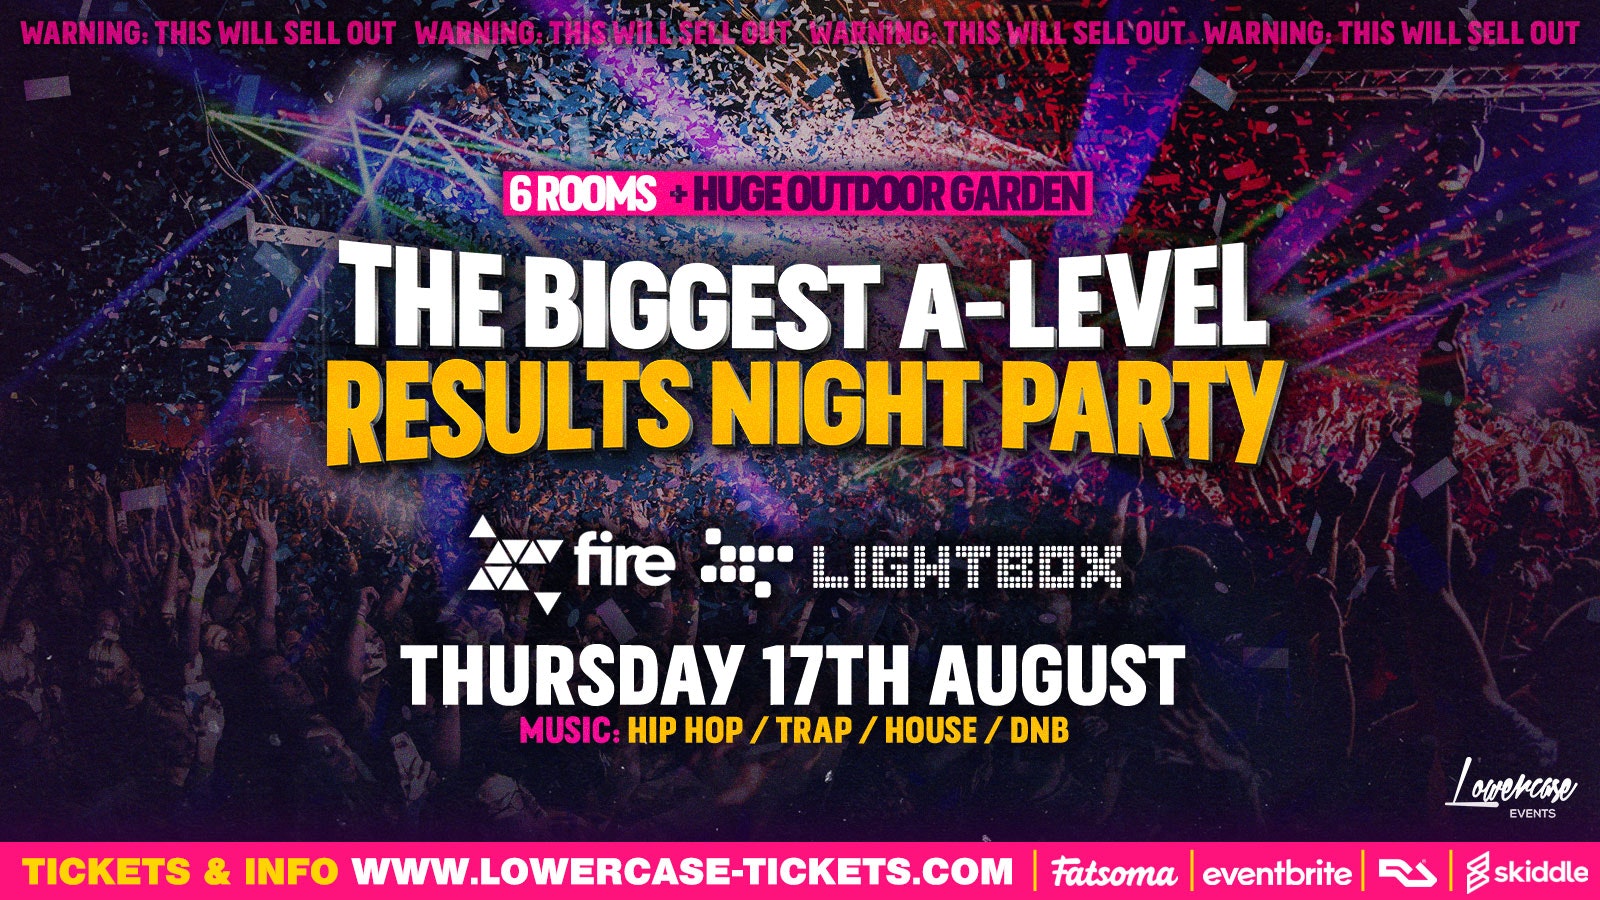 [ALMOST SOLD OUT] THE BIGGEST A-LEVEL RESULTS NIGHT PARTY @ FIRE & LIGHTBOX! 6 ROOMS + HUGE OUTDOOR GARDEN 🔥🔥🔥